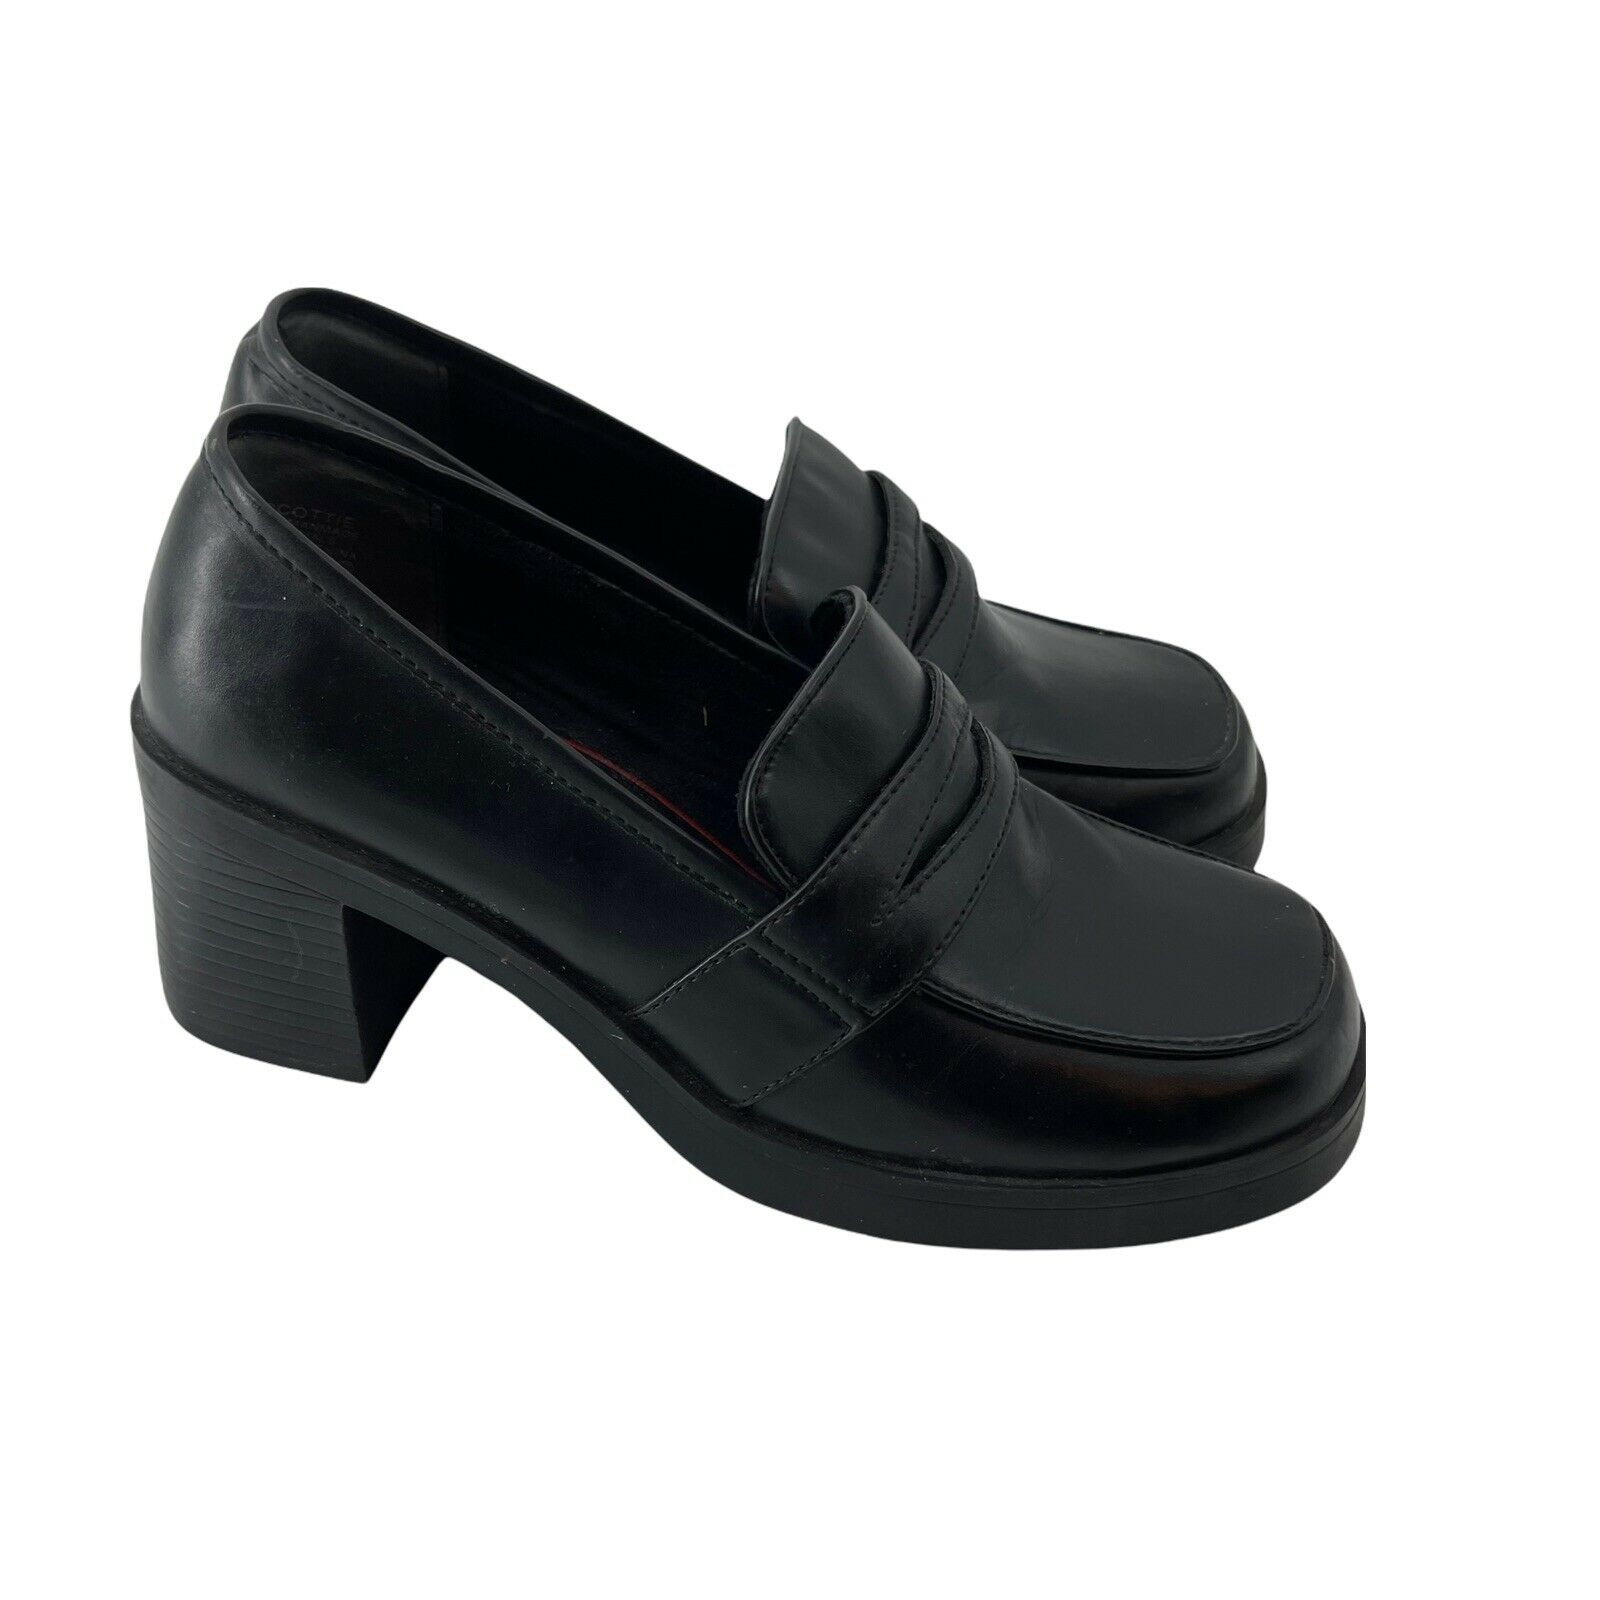 Mudd Y2K Chunky Heel Oxford Penny Loafer Shoes Black Womens Size 9 Vegan Leather